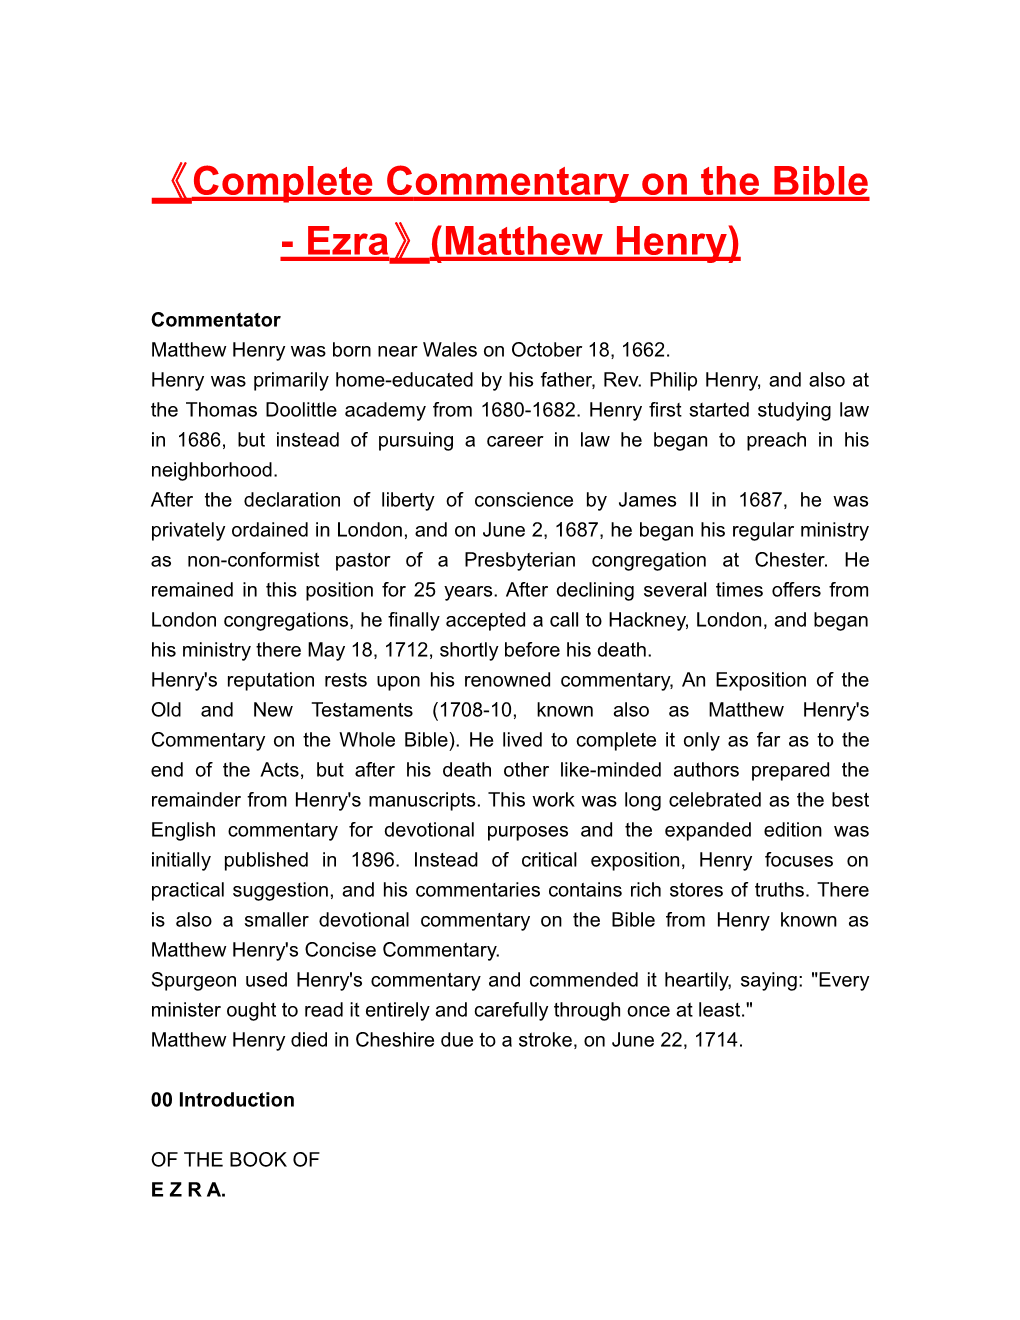 Complete Commentary on the Bible - Ezra (Matthew Henry)